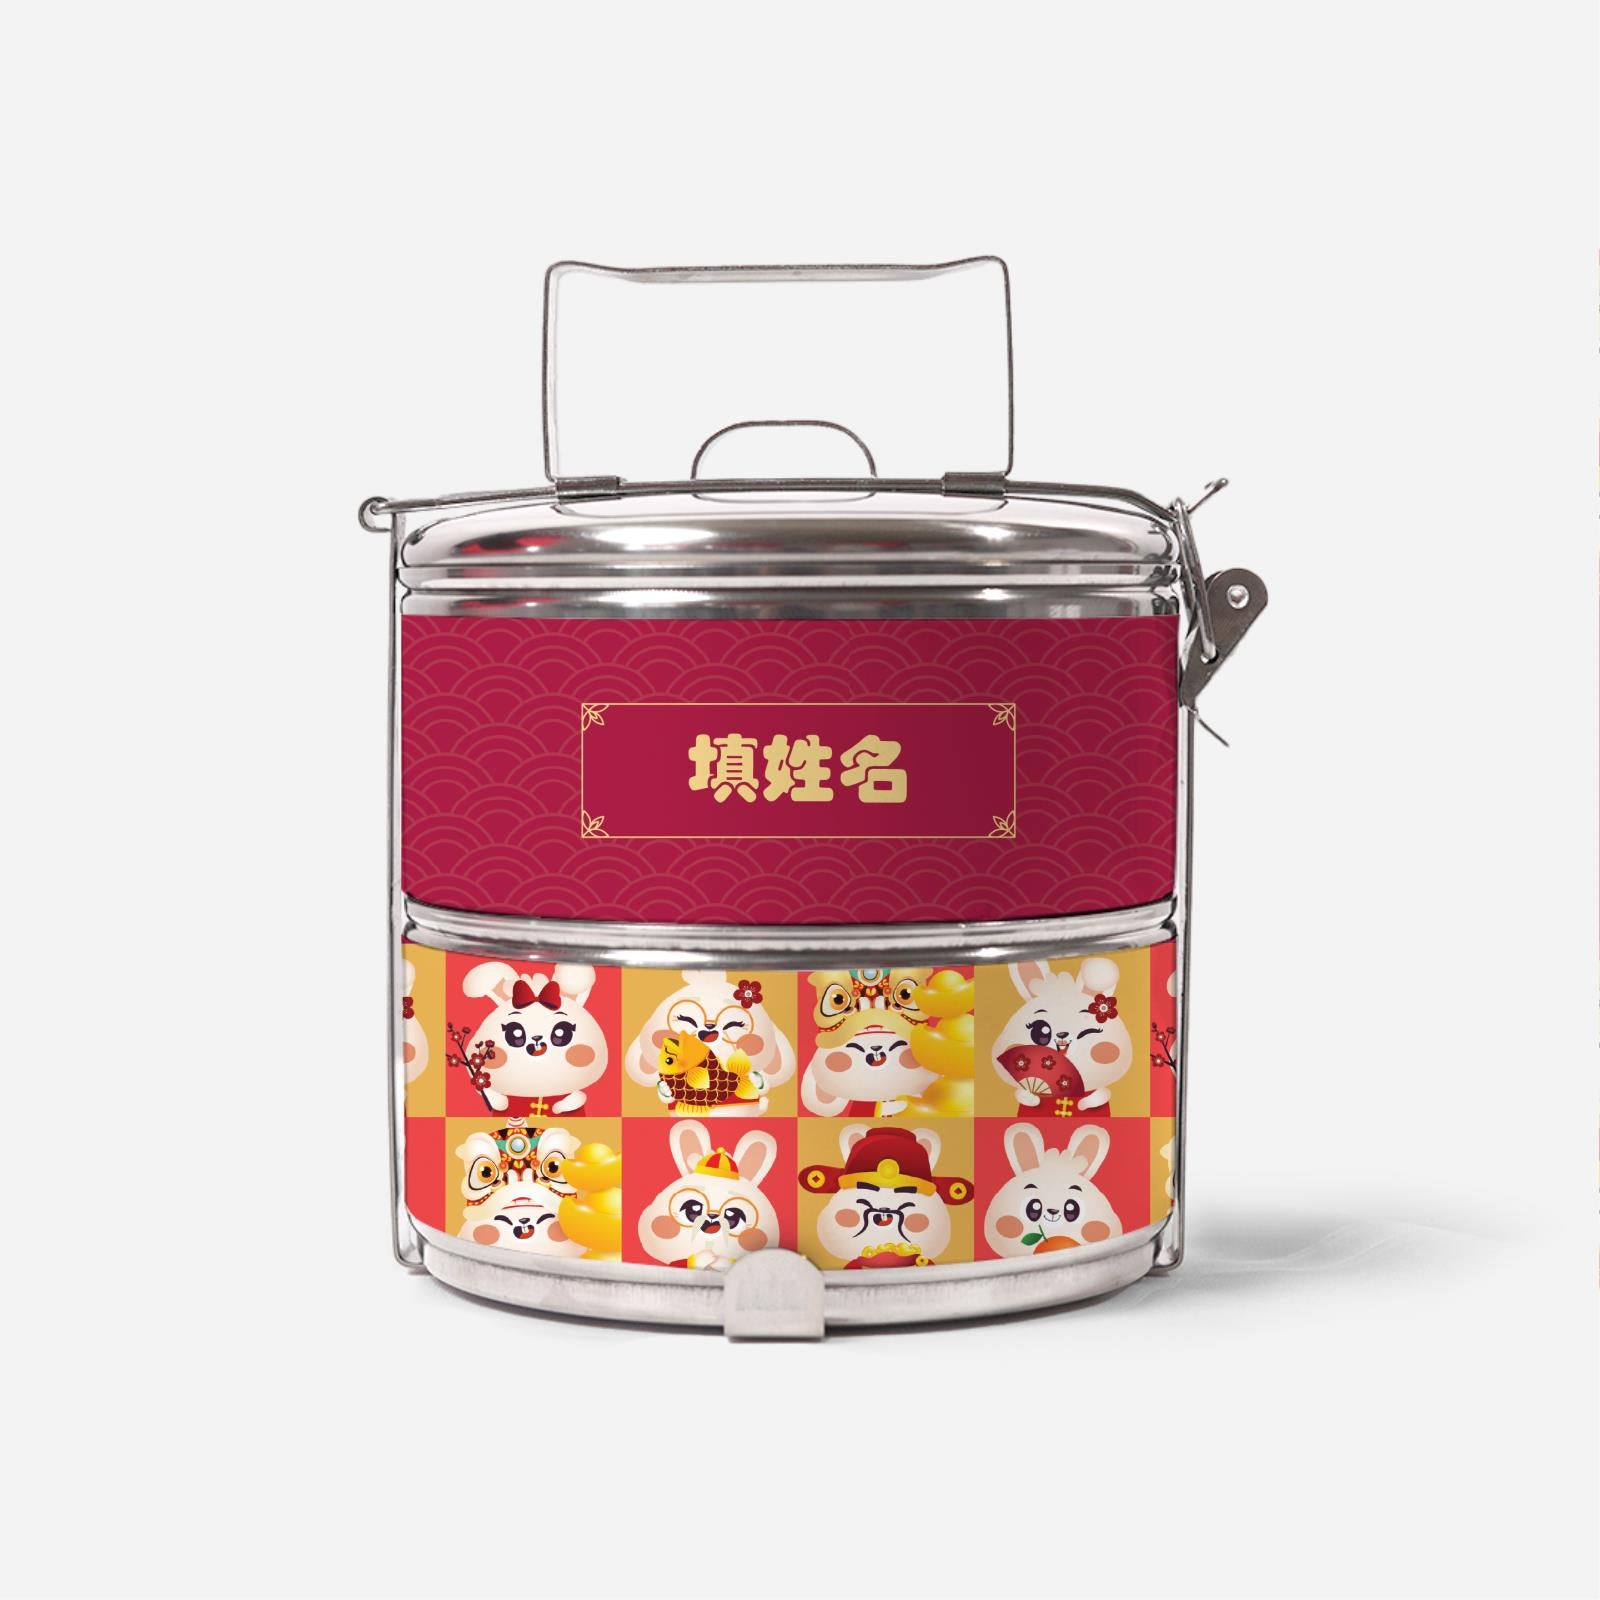 Cny Rabbit Family - Rabbit Family Red Two-Tier Standard Tififn Carrier With Chinese Personalization